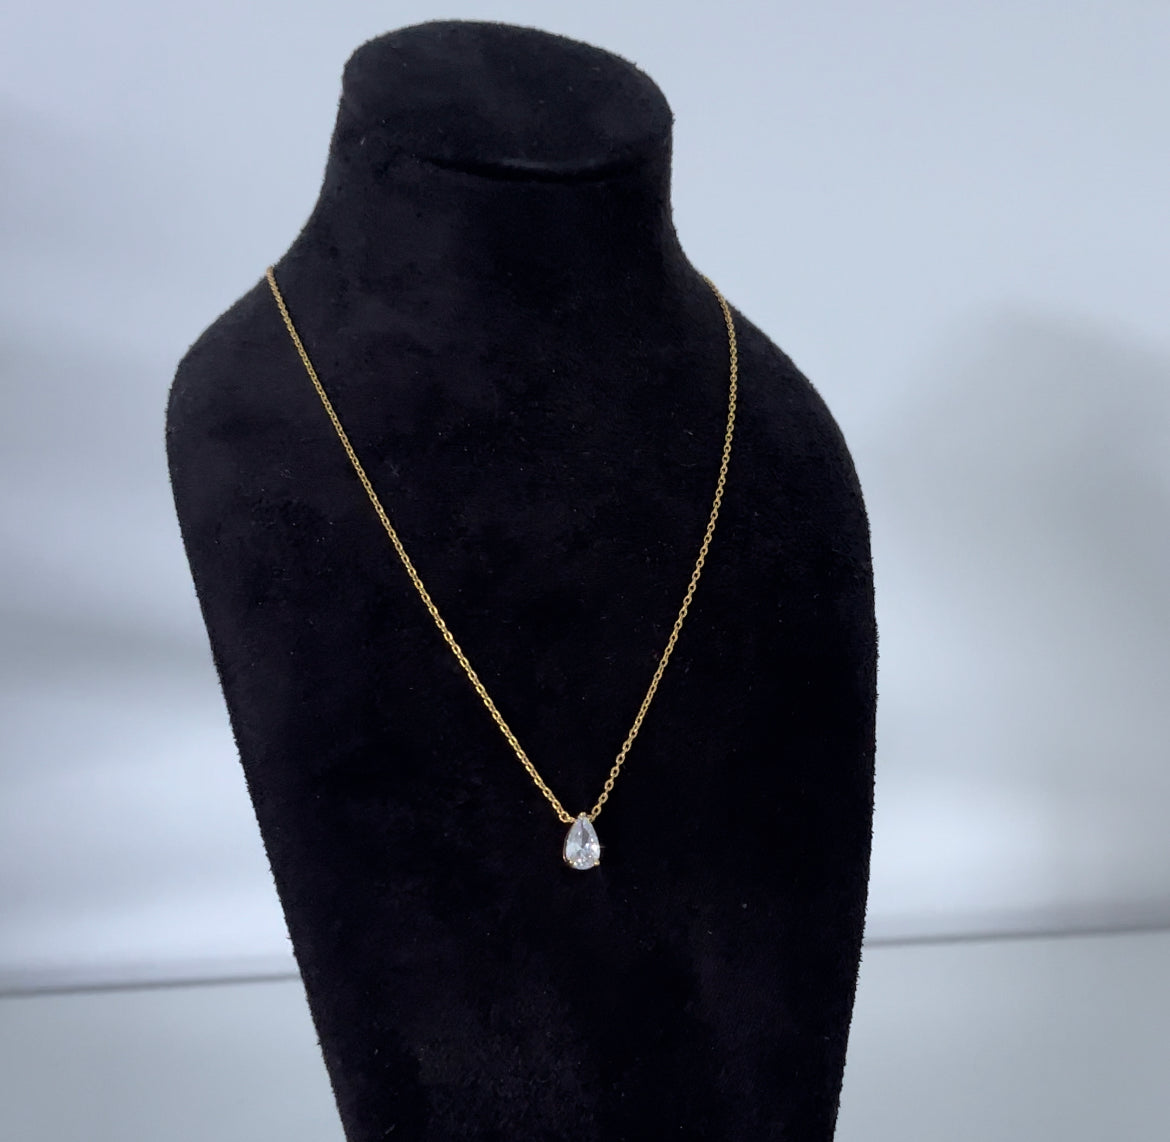 Tear Drop Diamante Necklace - 18ct Gold Plated